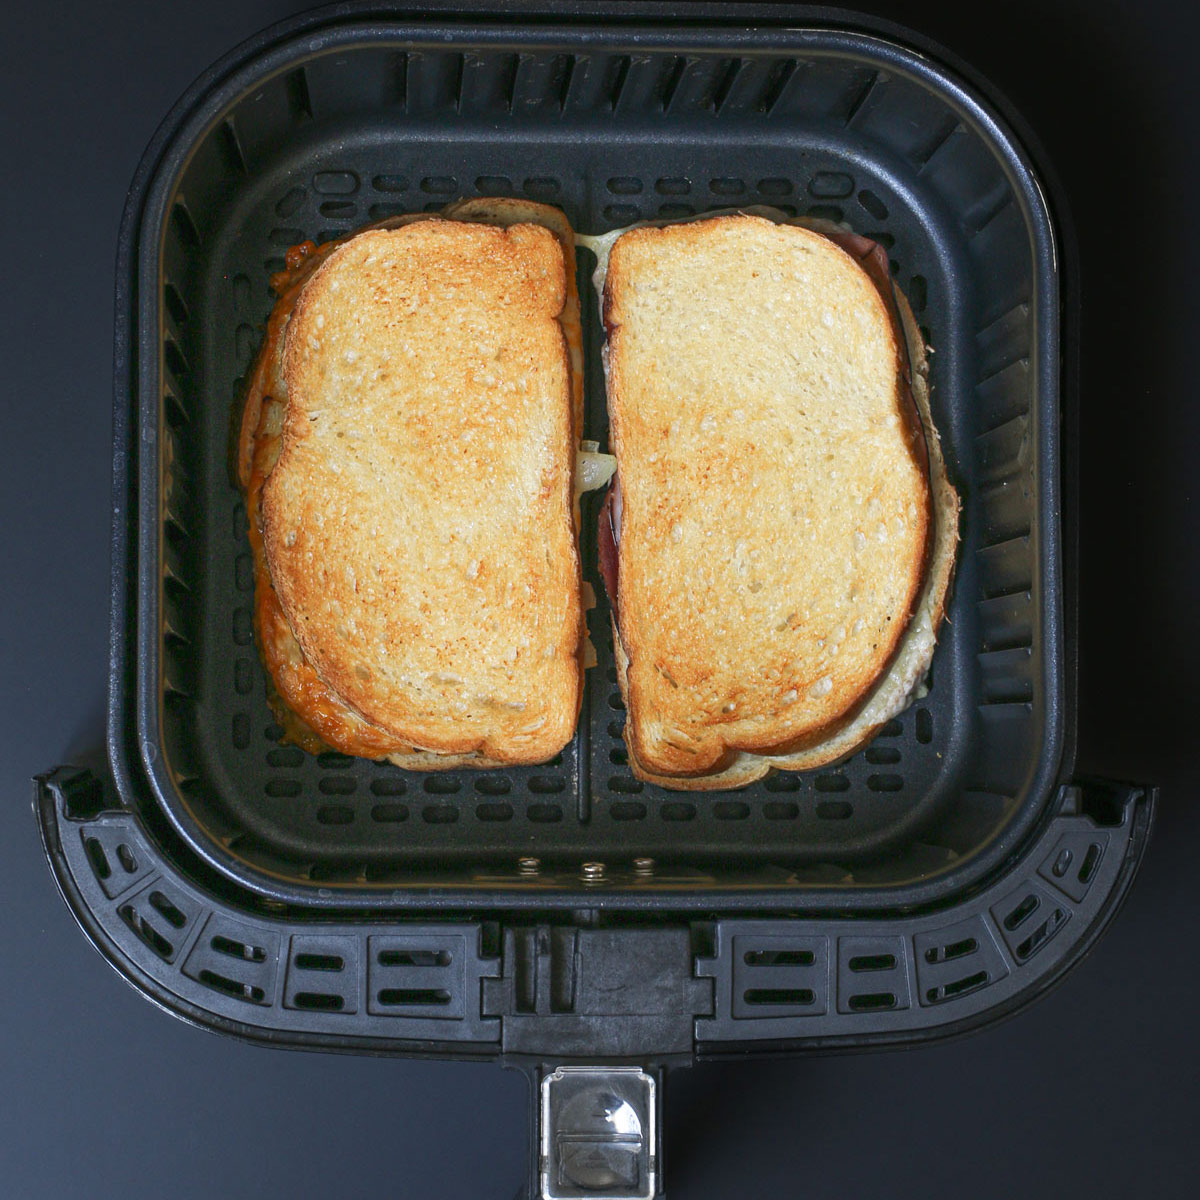 two air fryer grilled cheese sandwiches in basket.